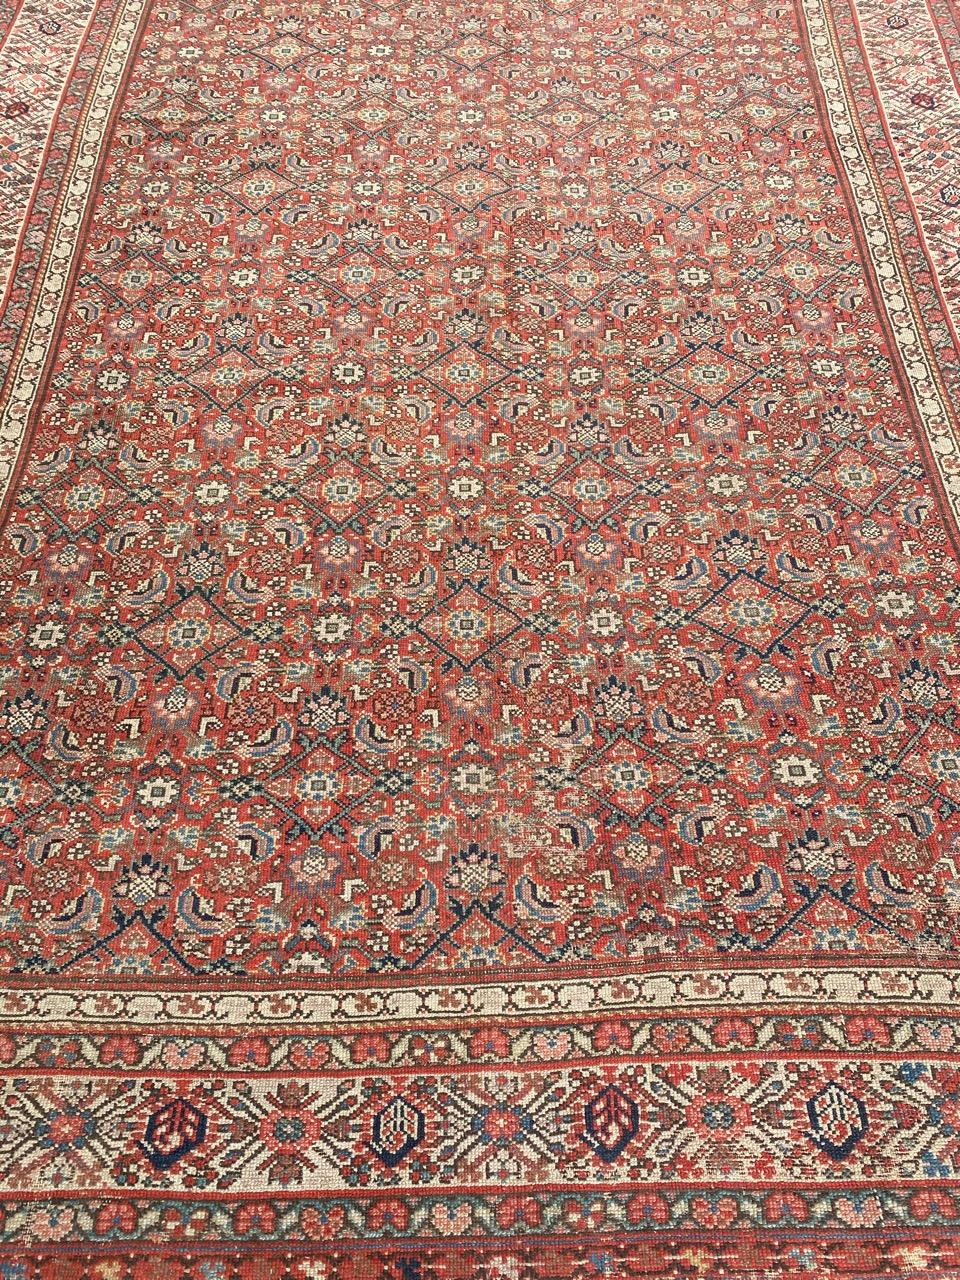 Very beautiful long Kurdish rug with beautiful decorative Herati design and nice natural colors, entirely and finely hand knotted with wool velvet on cotton foundation.

✨✨✨
